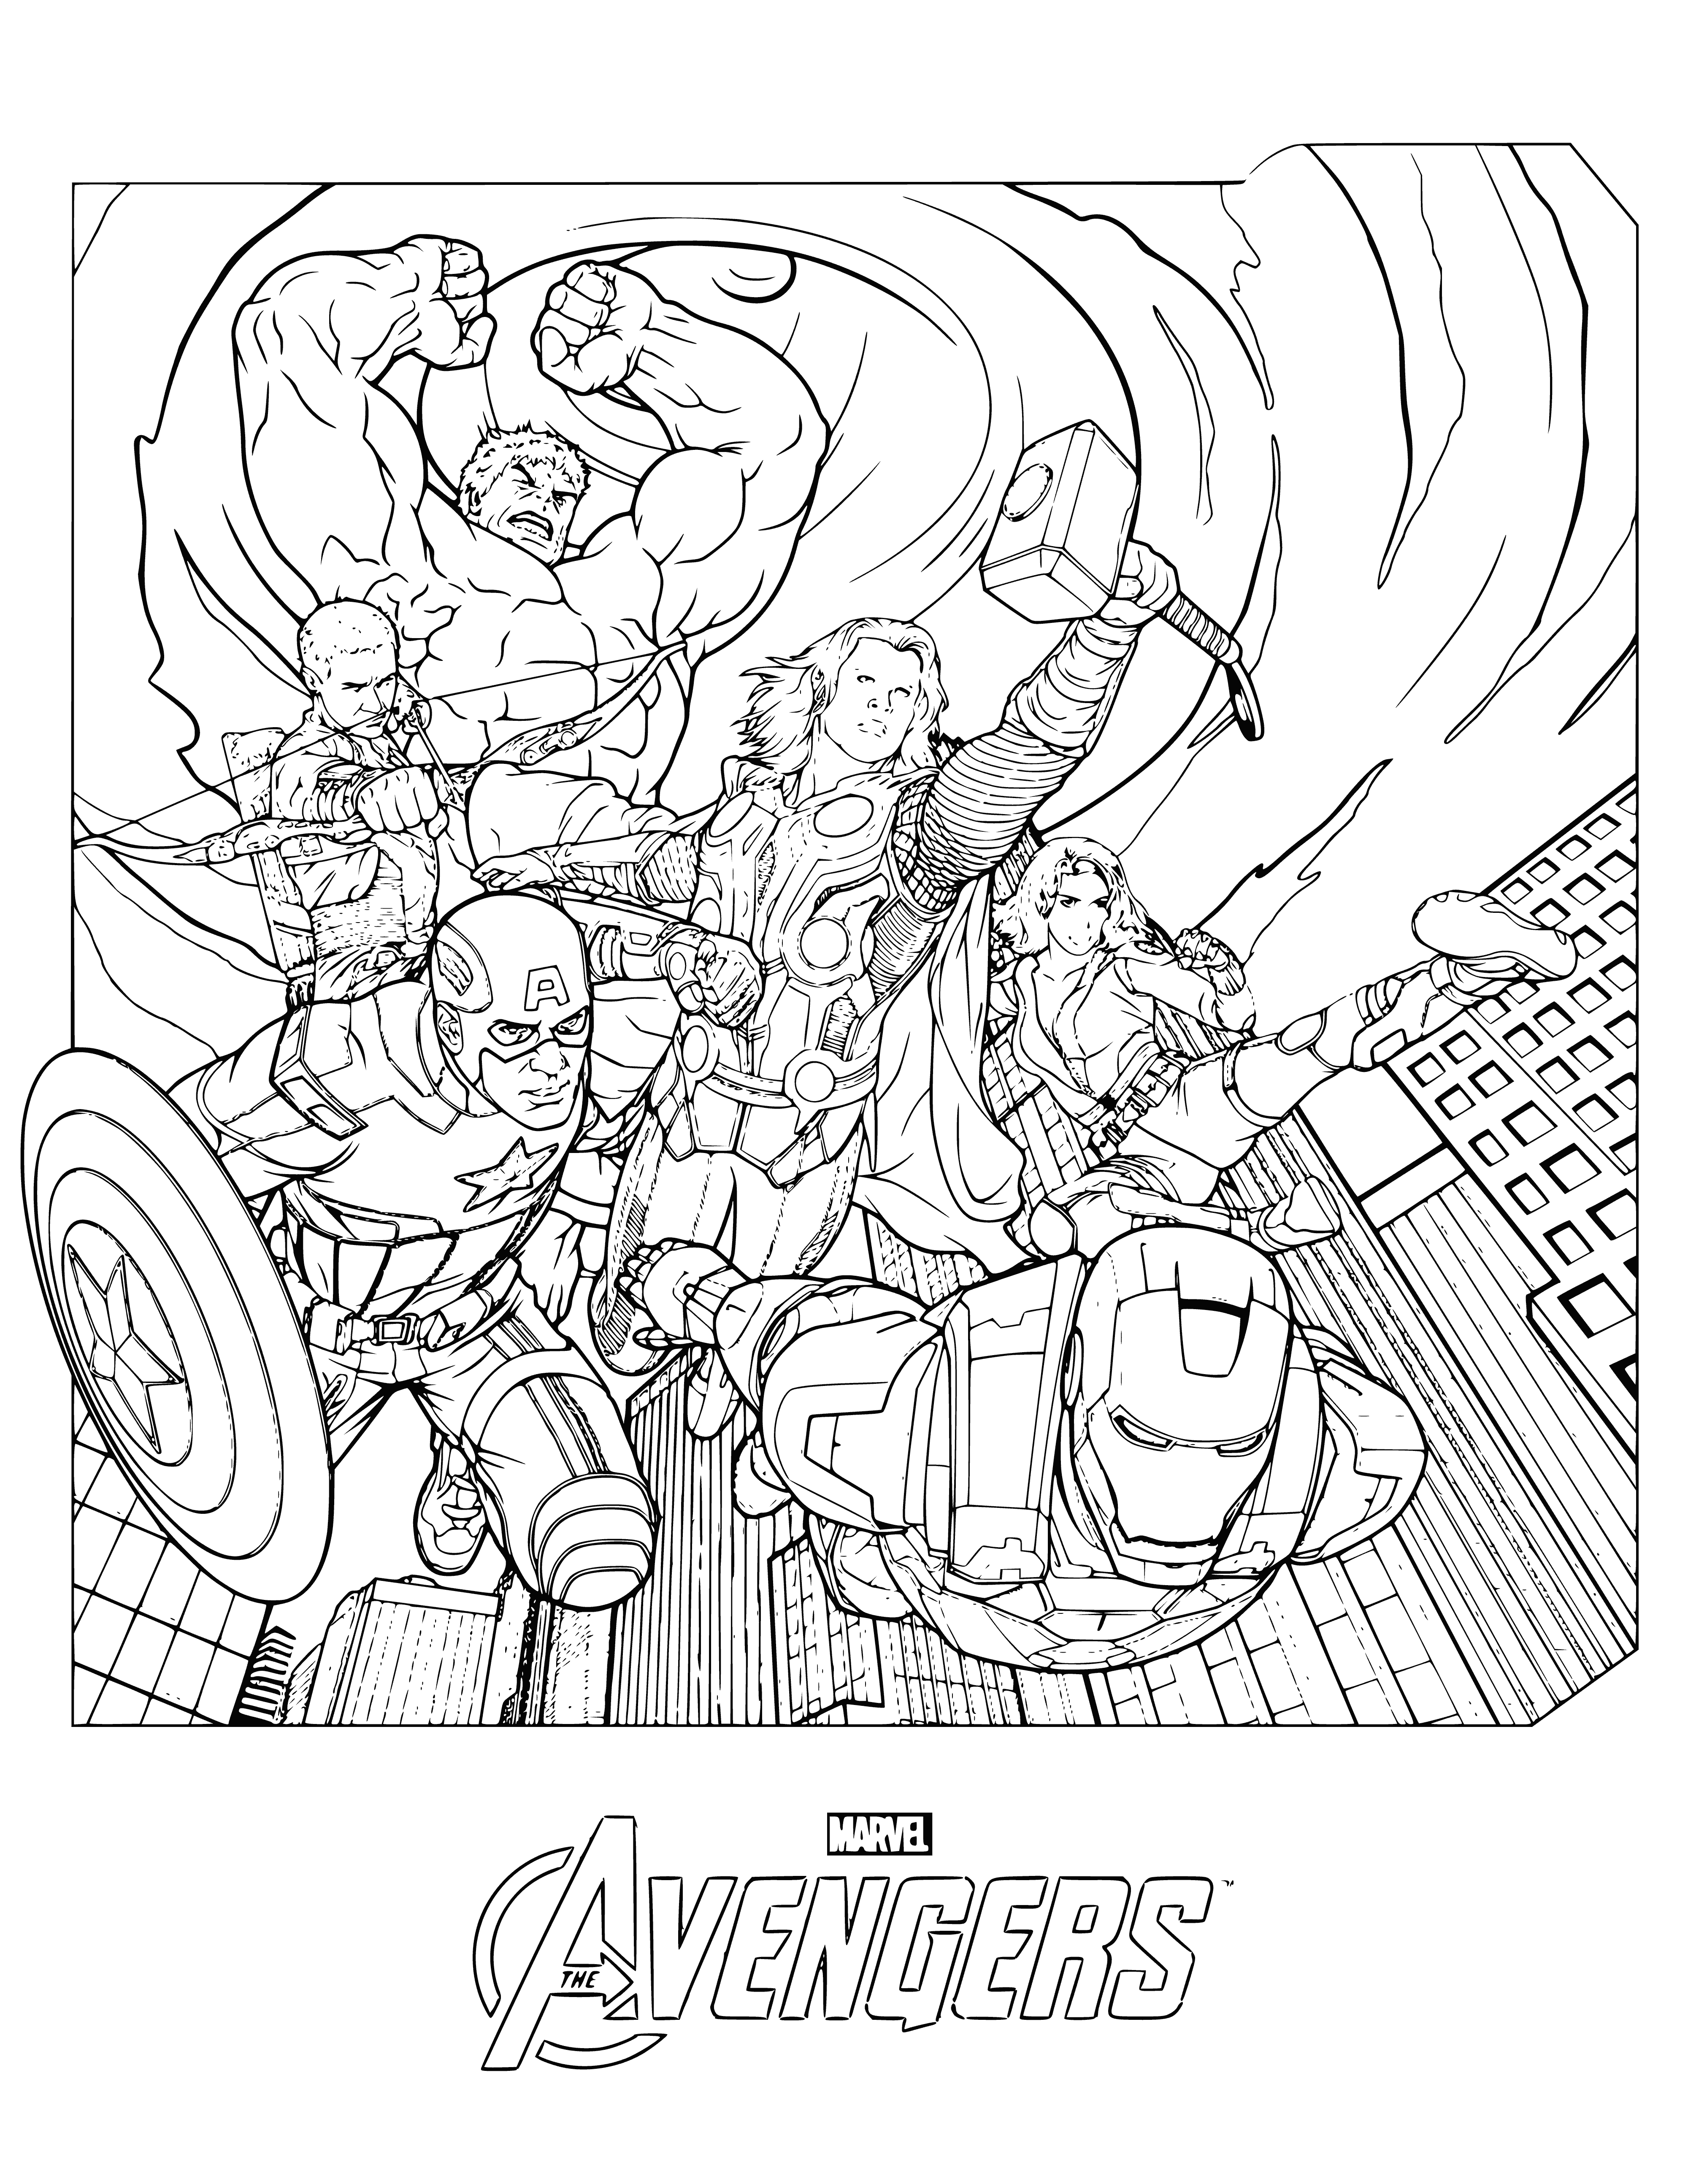 coloring page: Five men in tight clothes stand in a row before a large, dark structure with a cityscape in the foreground.